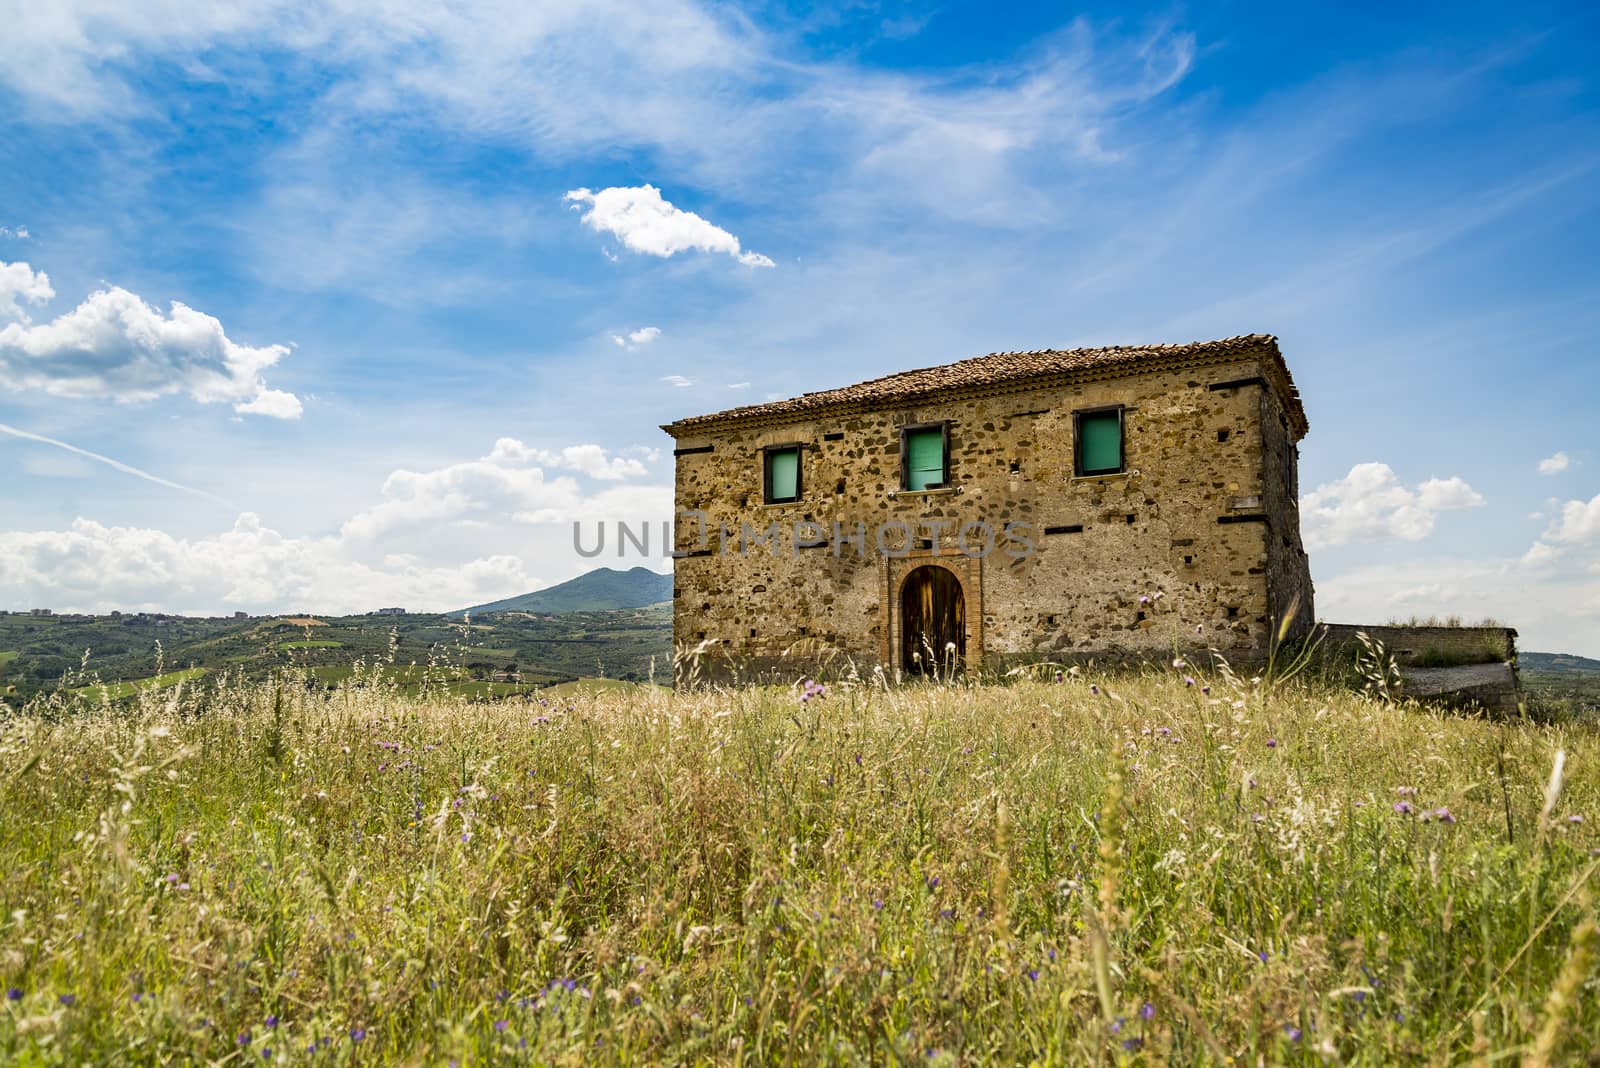 Hilly landscape with abandoned farm house in Basilicata region in Italy